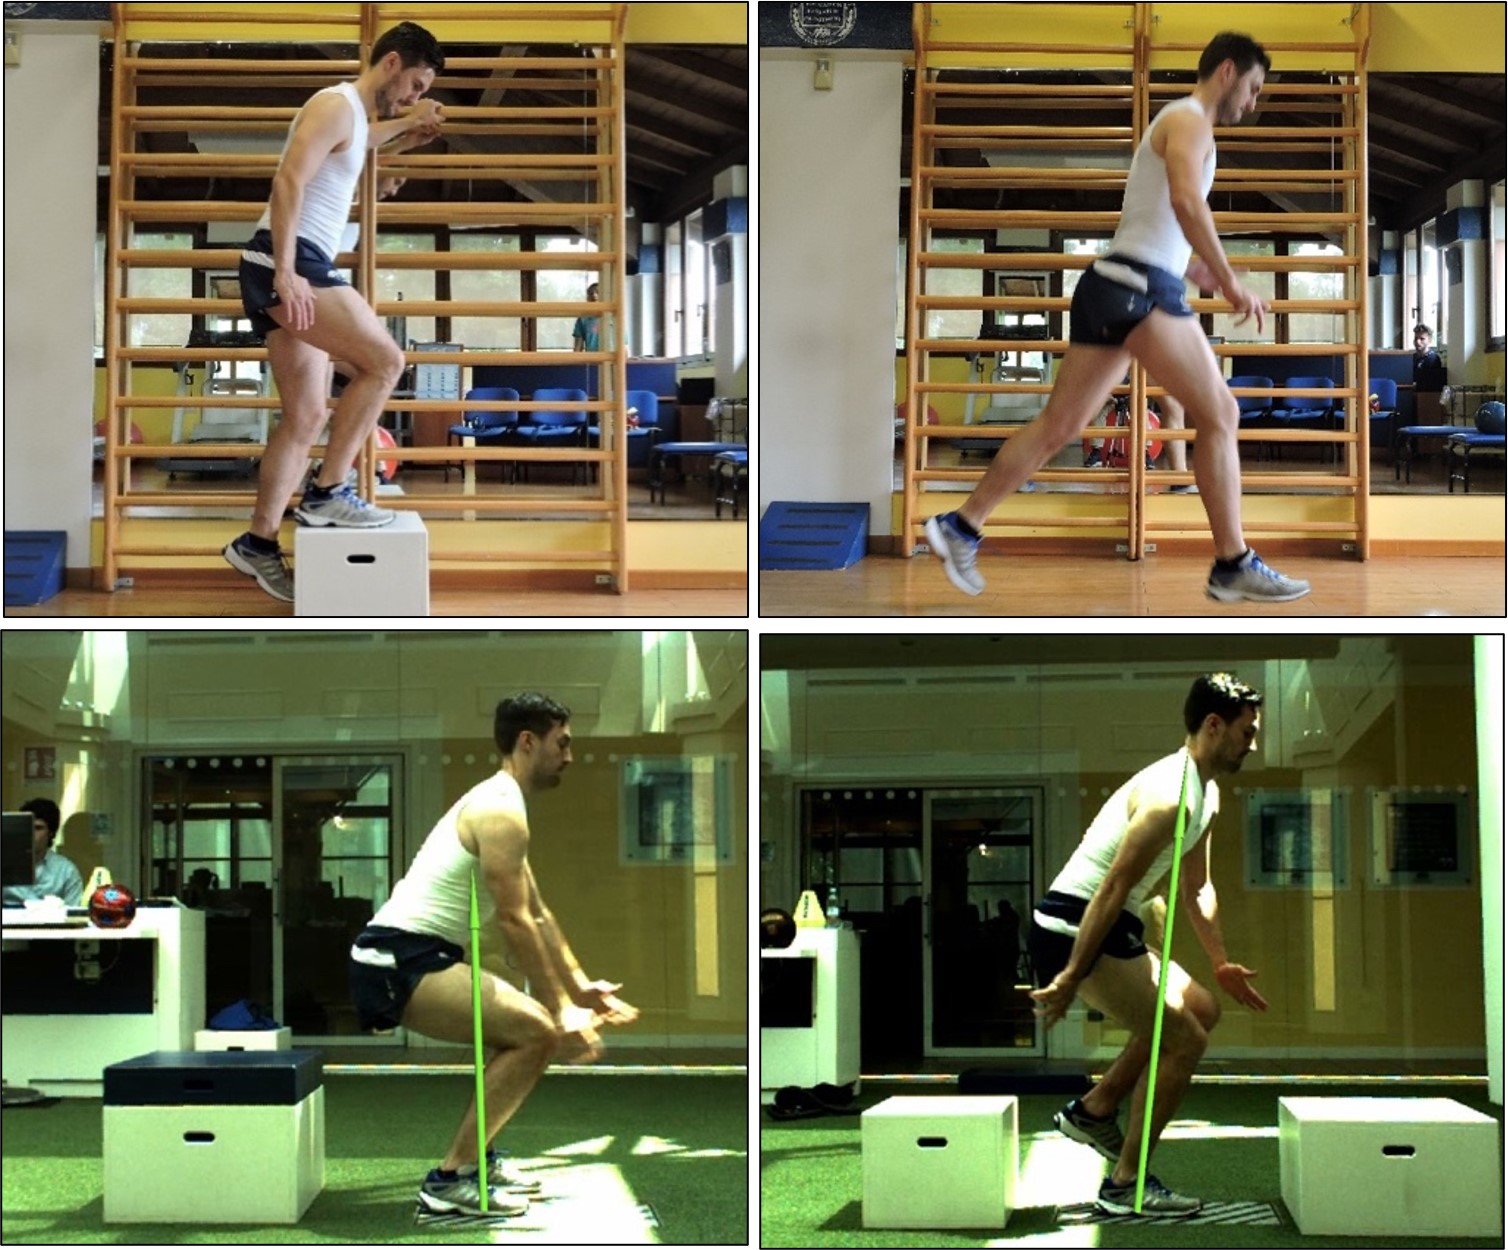 Recommendations for Plyometric Training after ACL Reconstruction